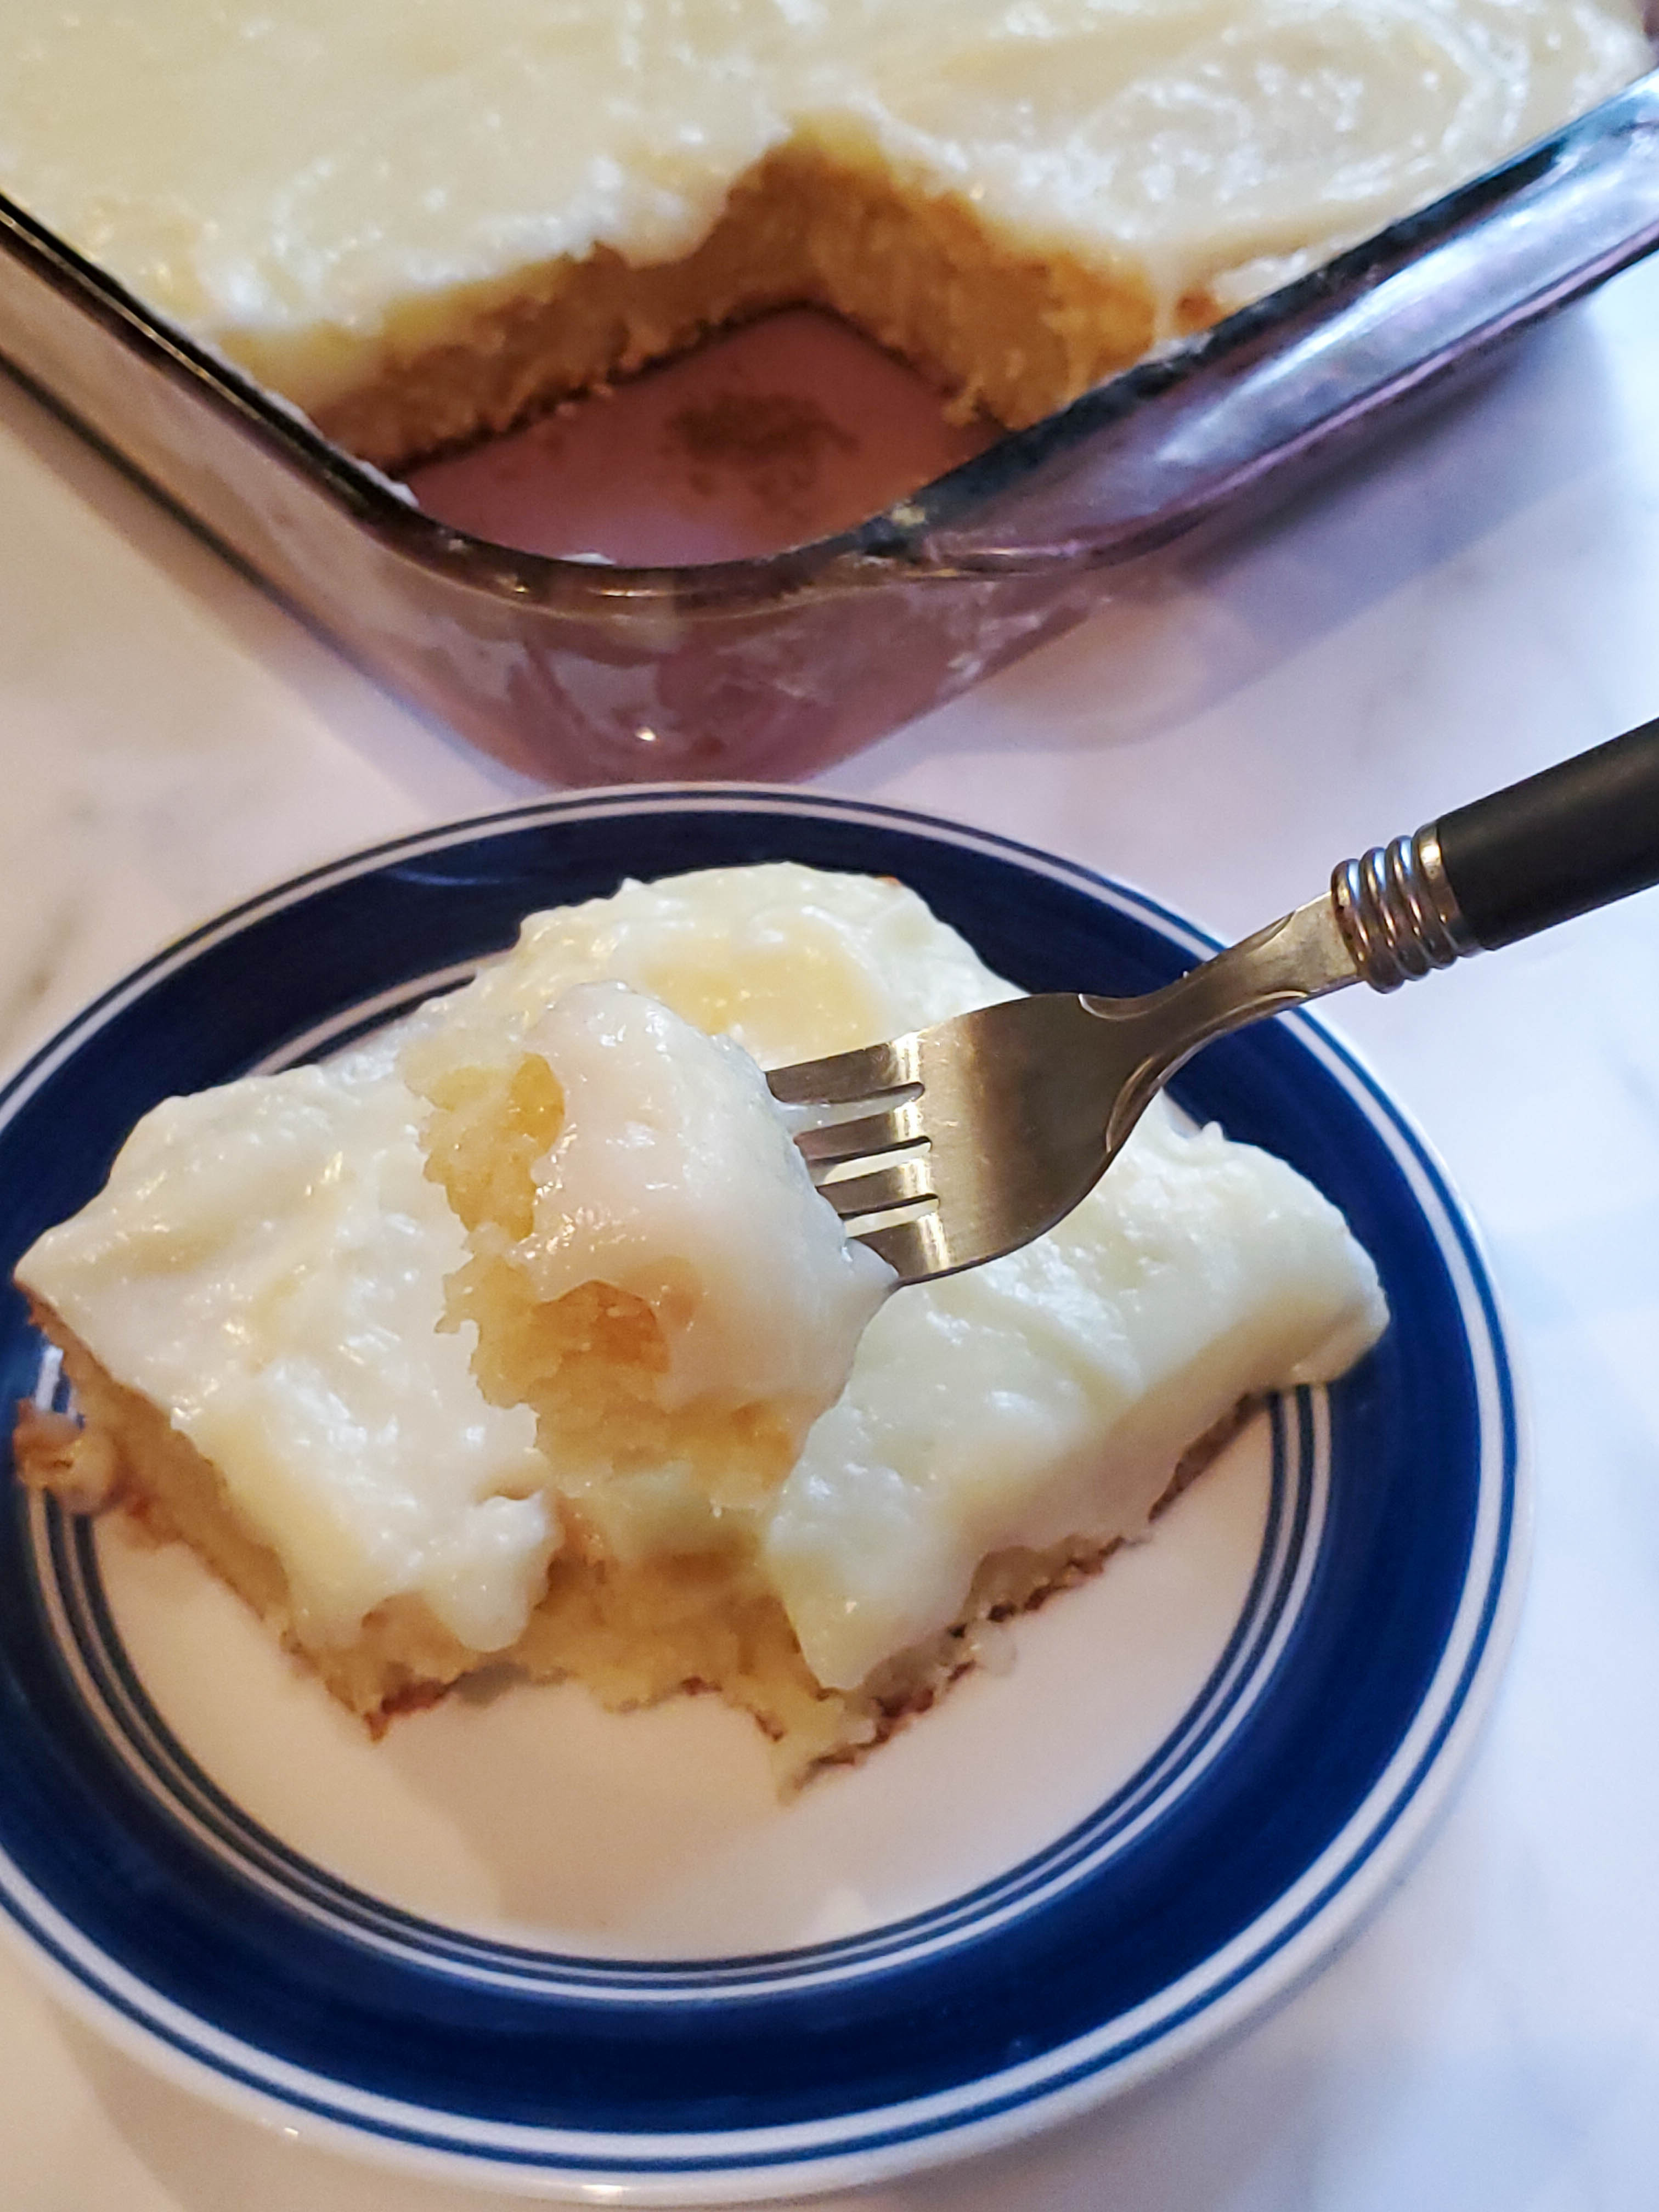 lemon cake on a plate with a bite on the fork